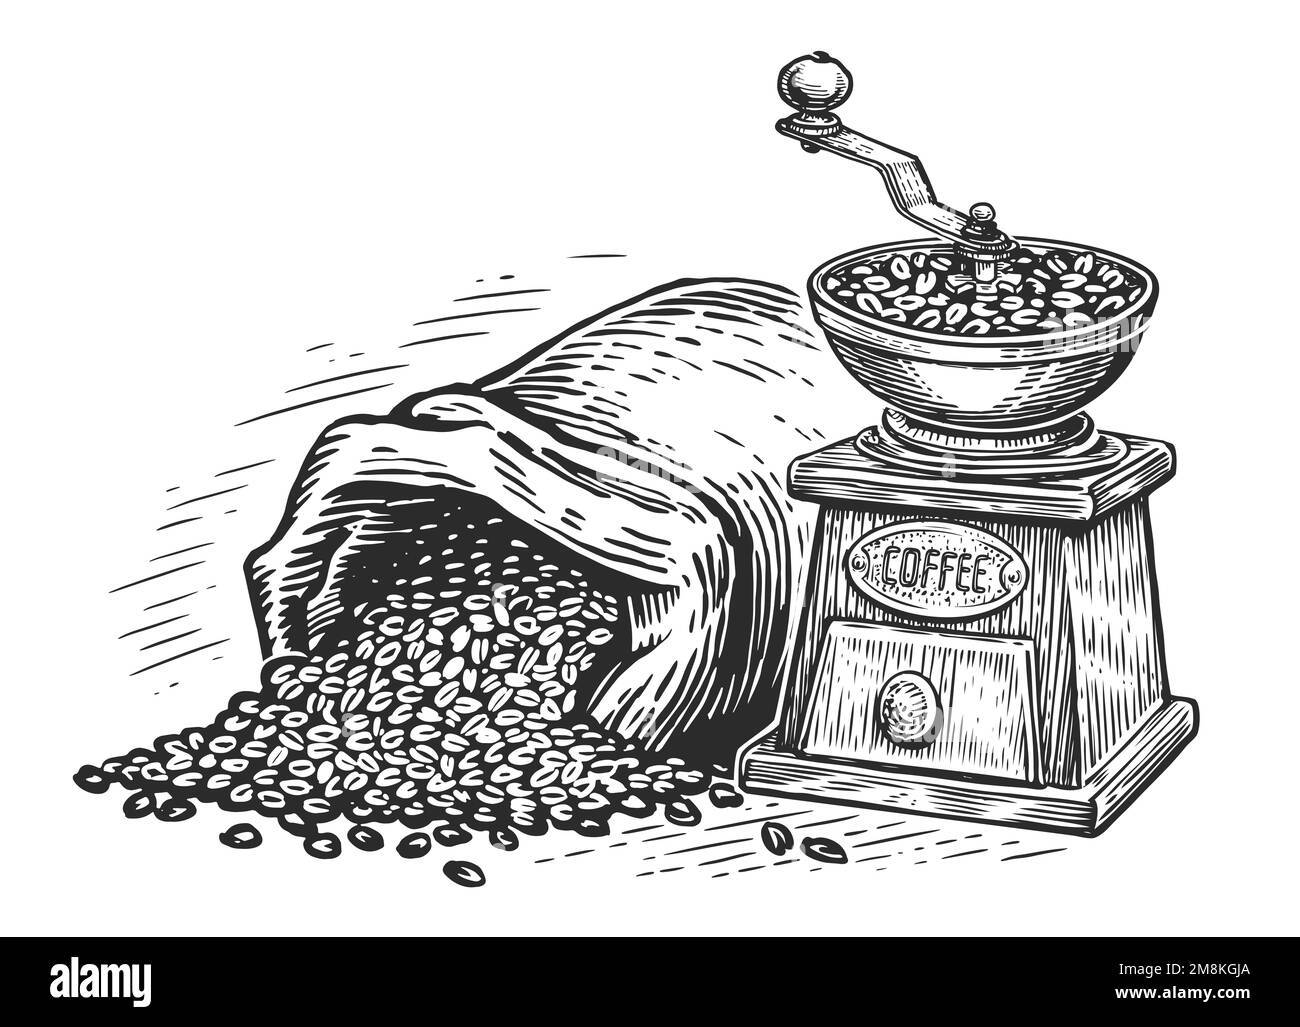 Coffee grinder and coffee beans in vintage engraving style. Drink concept. Hand drawn sketch illustration Stock Photo